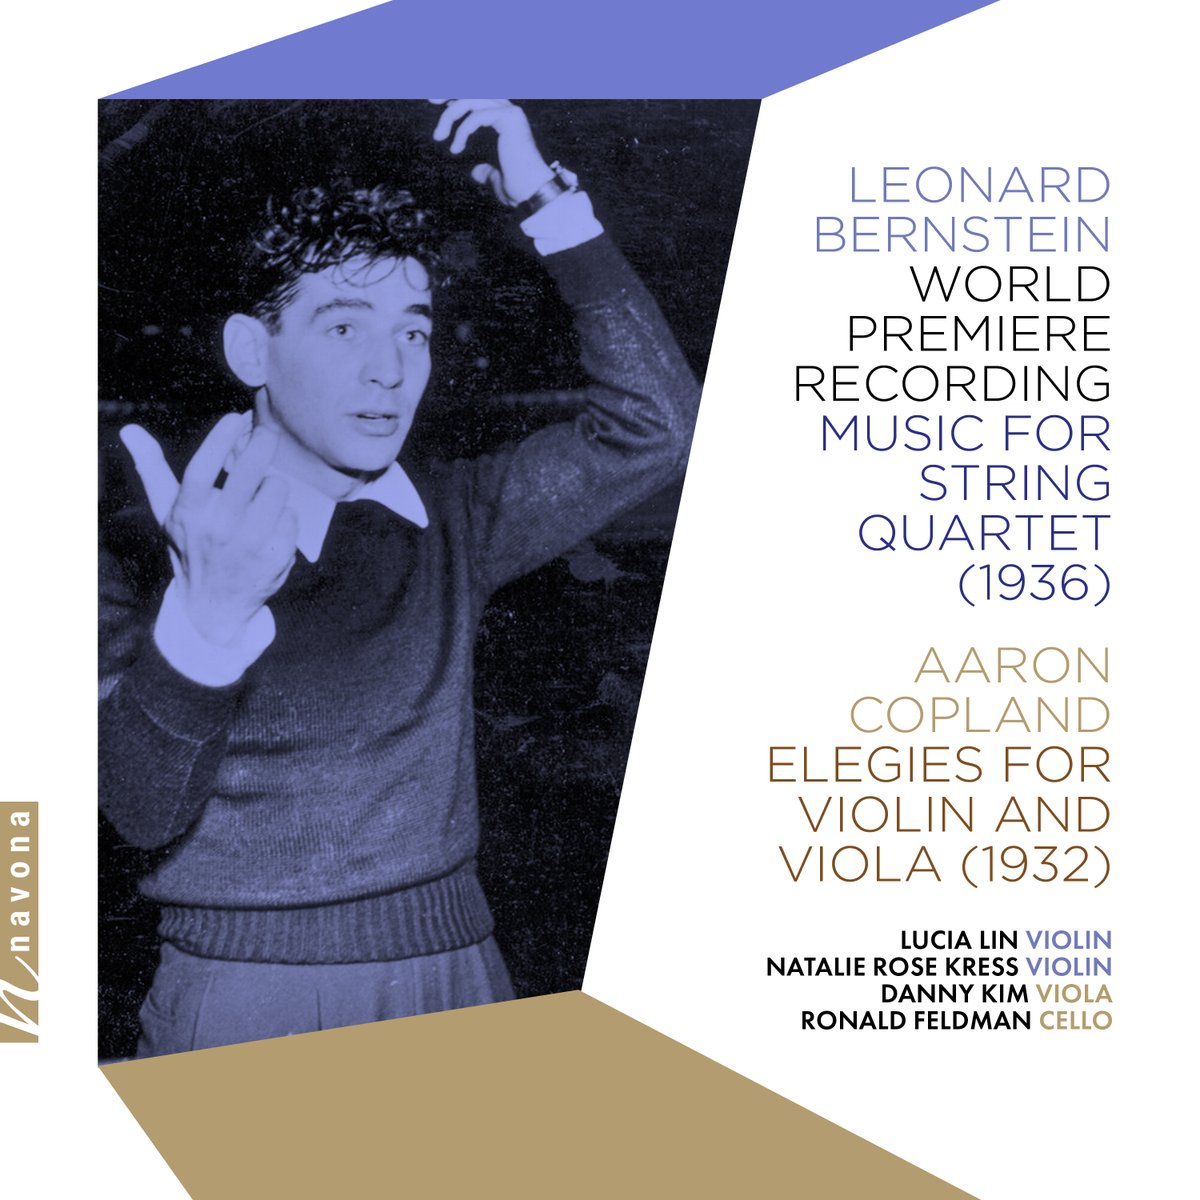 Movement II of @LennyBernstein's MUSIC FOR STRING QUARTET takes 'a calmer approach that emits much emotion from the eloquent delivery,' said Take Effect. Read their full review of the world premiere recording here. takeeffectreviews.com/march-2024-3/2…